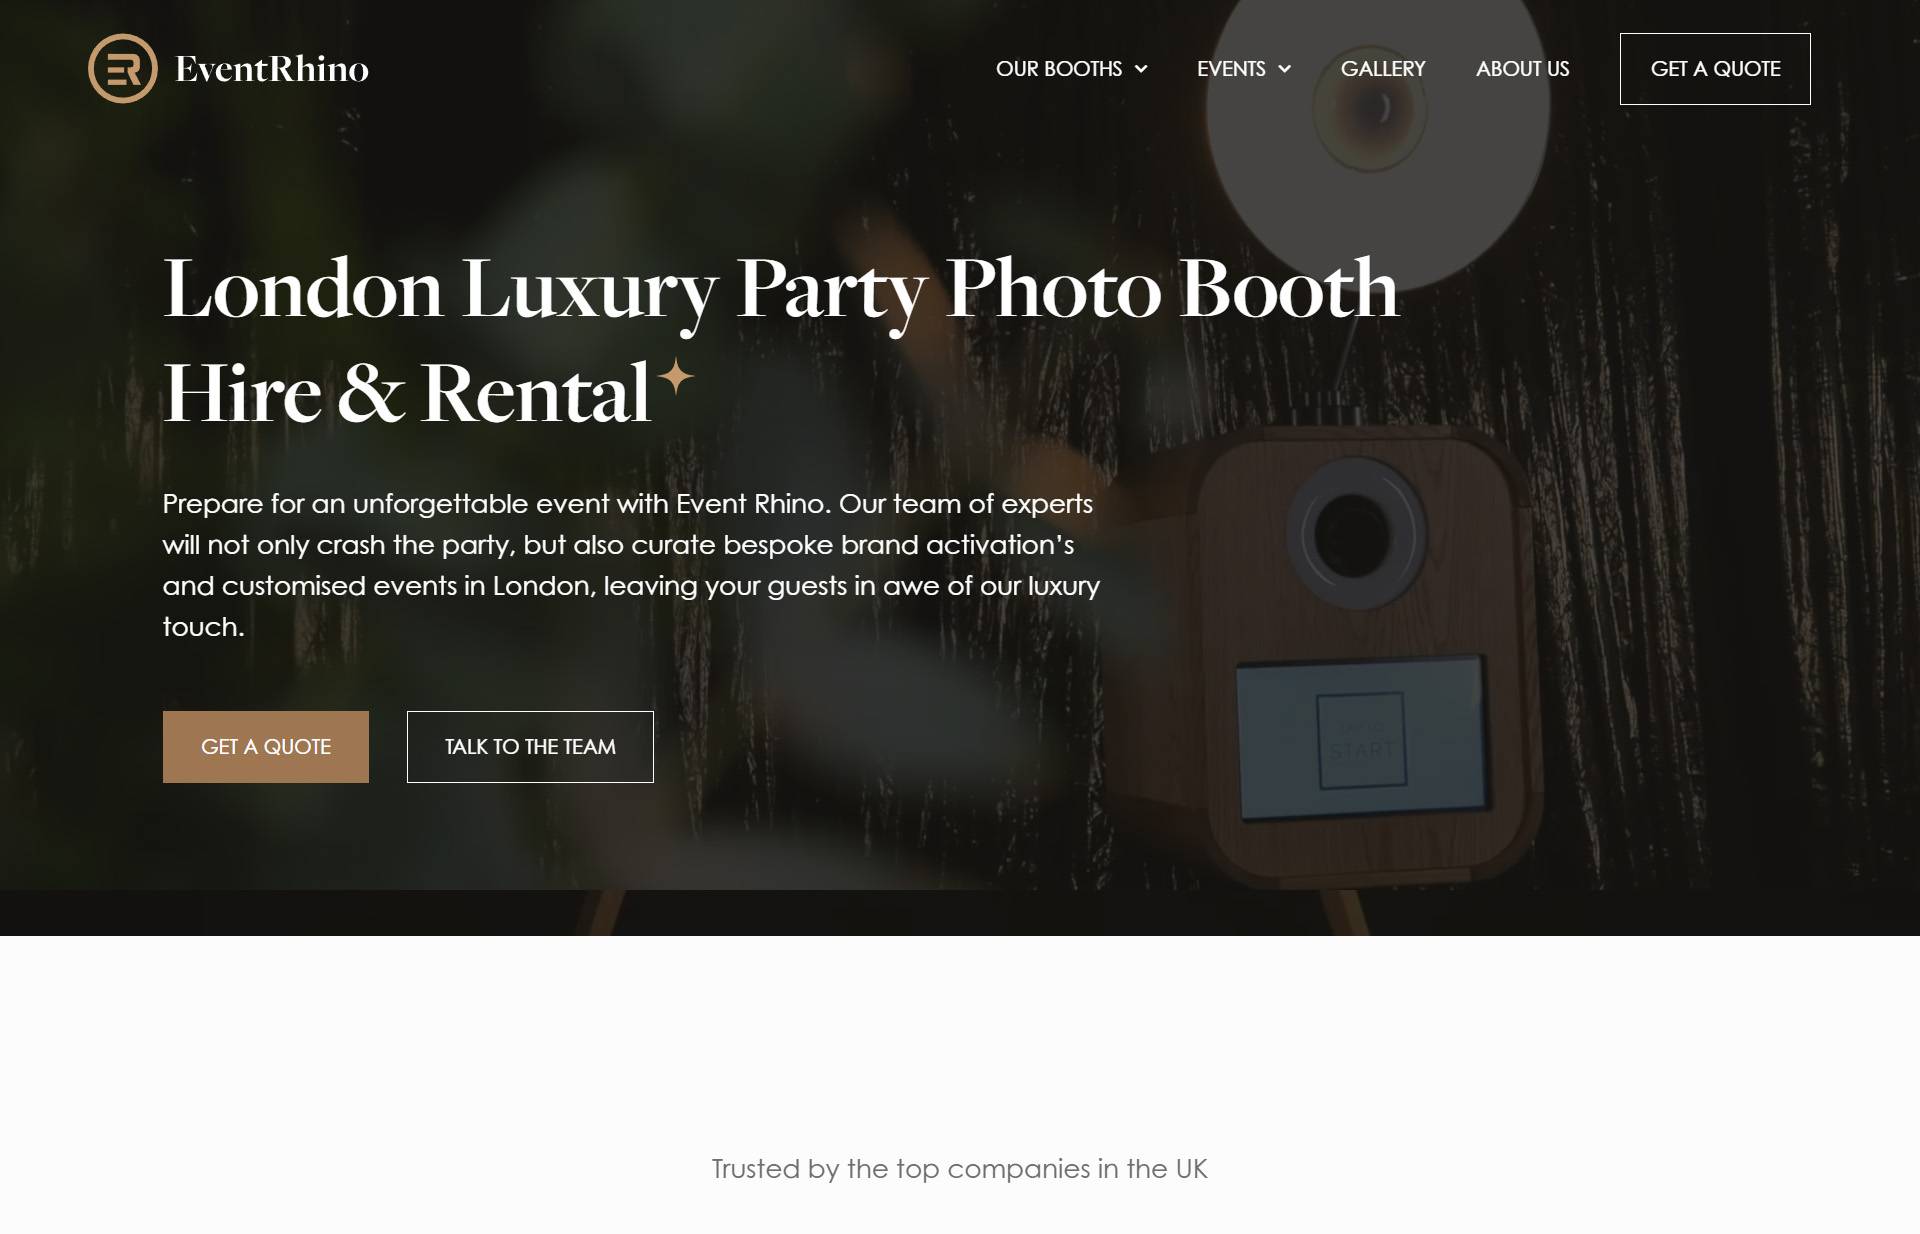 Website showing London luxury party photo boot hire and rental